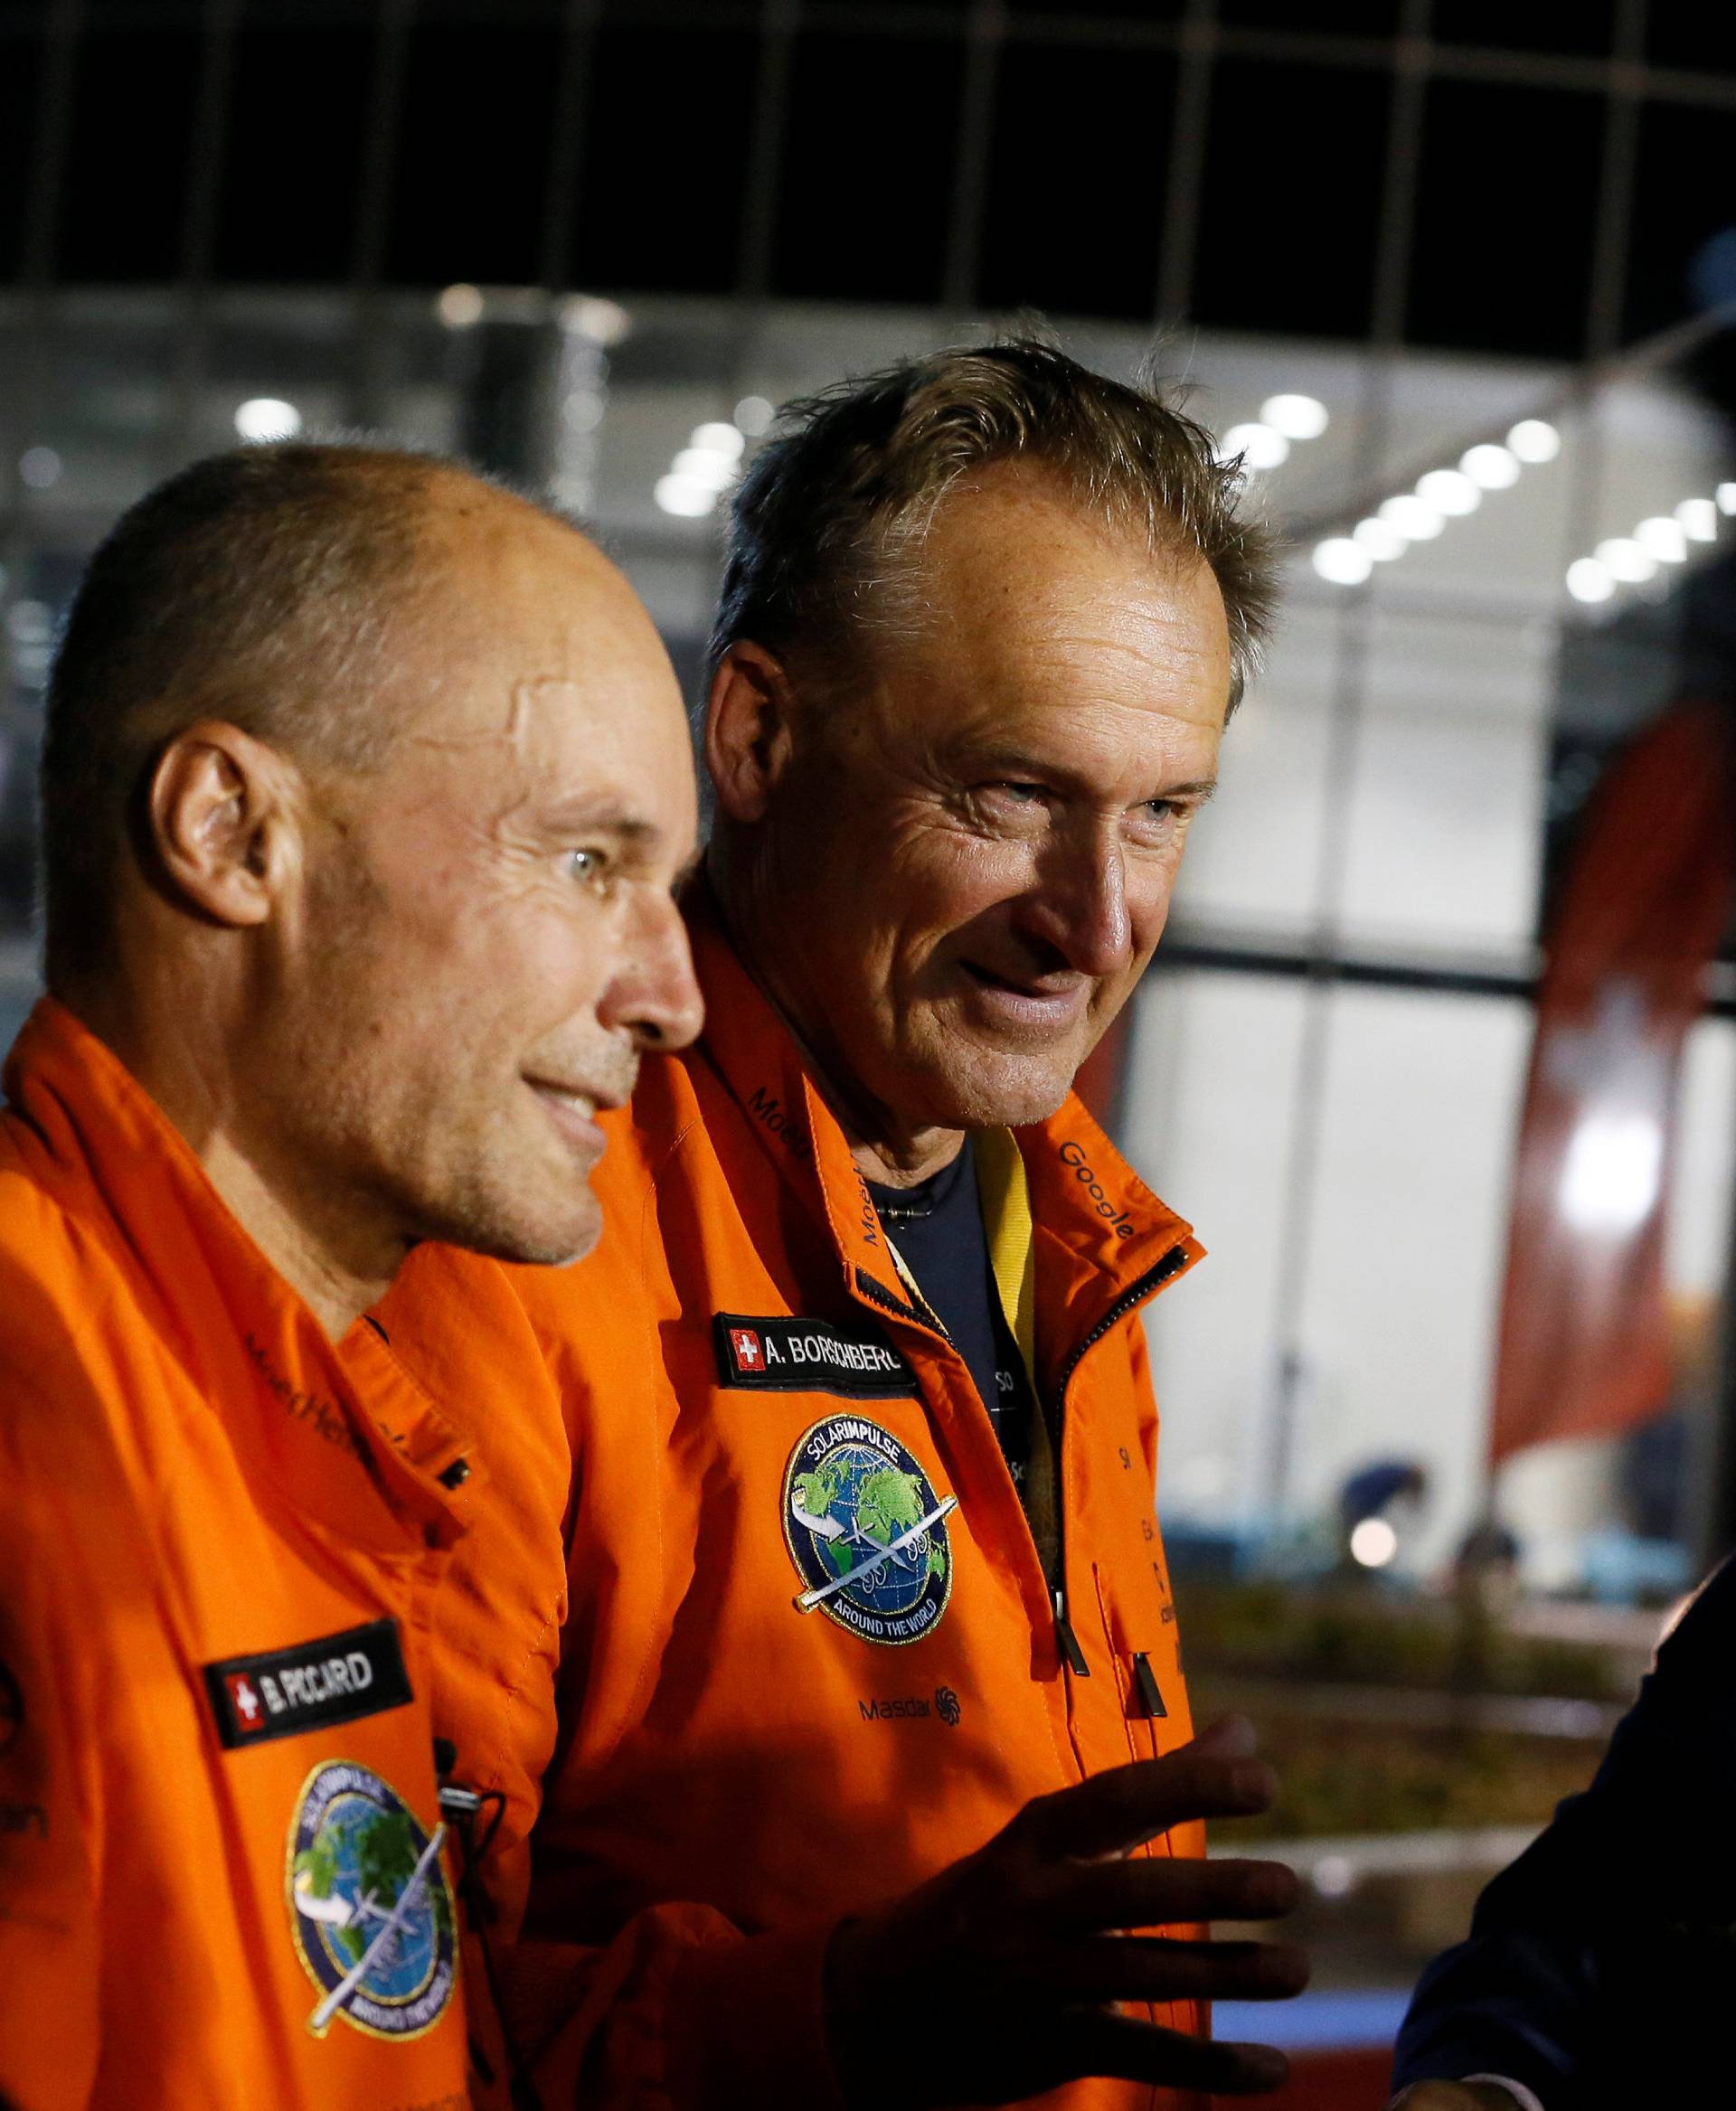 Pilot Andre Borschberg and Bertrand Piccard gesture after their arrival on Solar Impulse 2, a solar powered plane, at an airport in Abu Dhabi, UAE